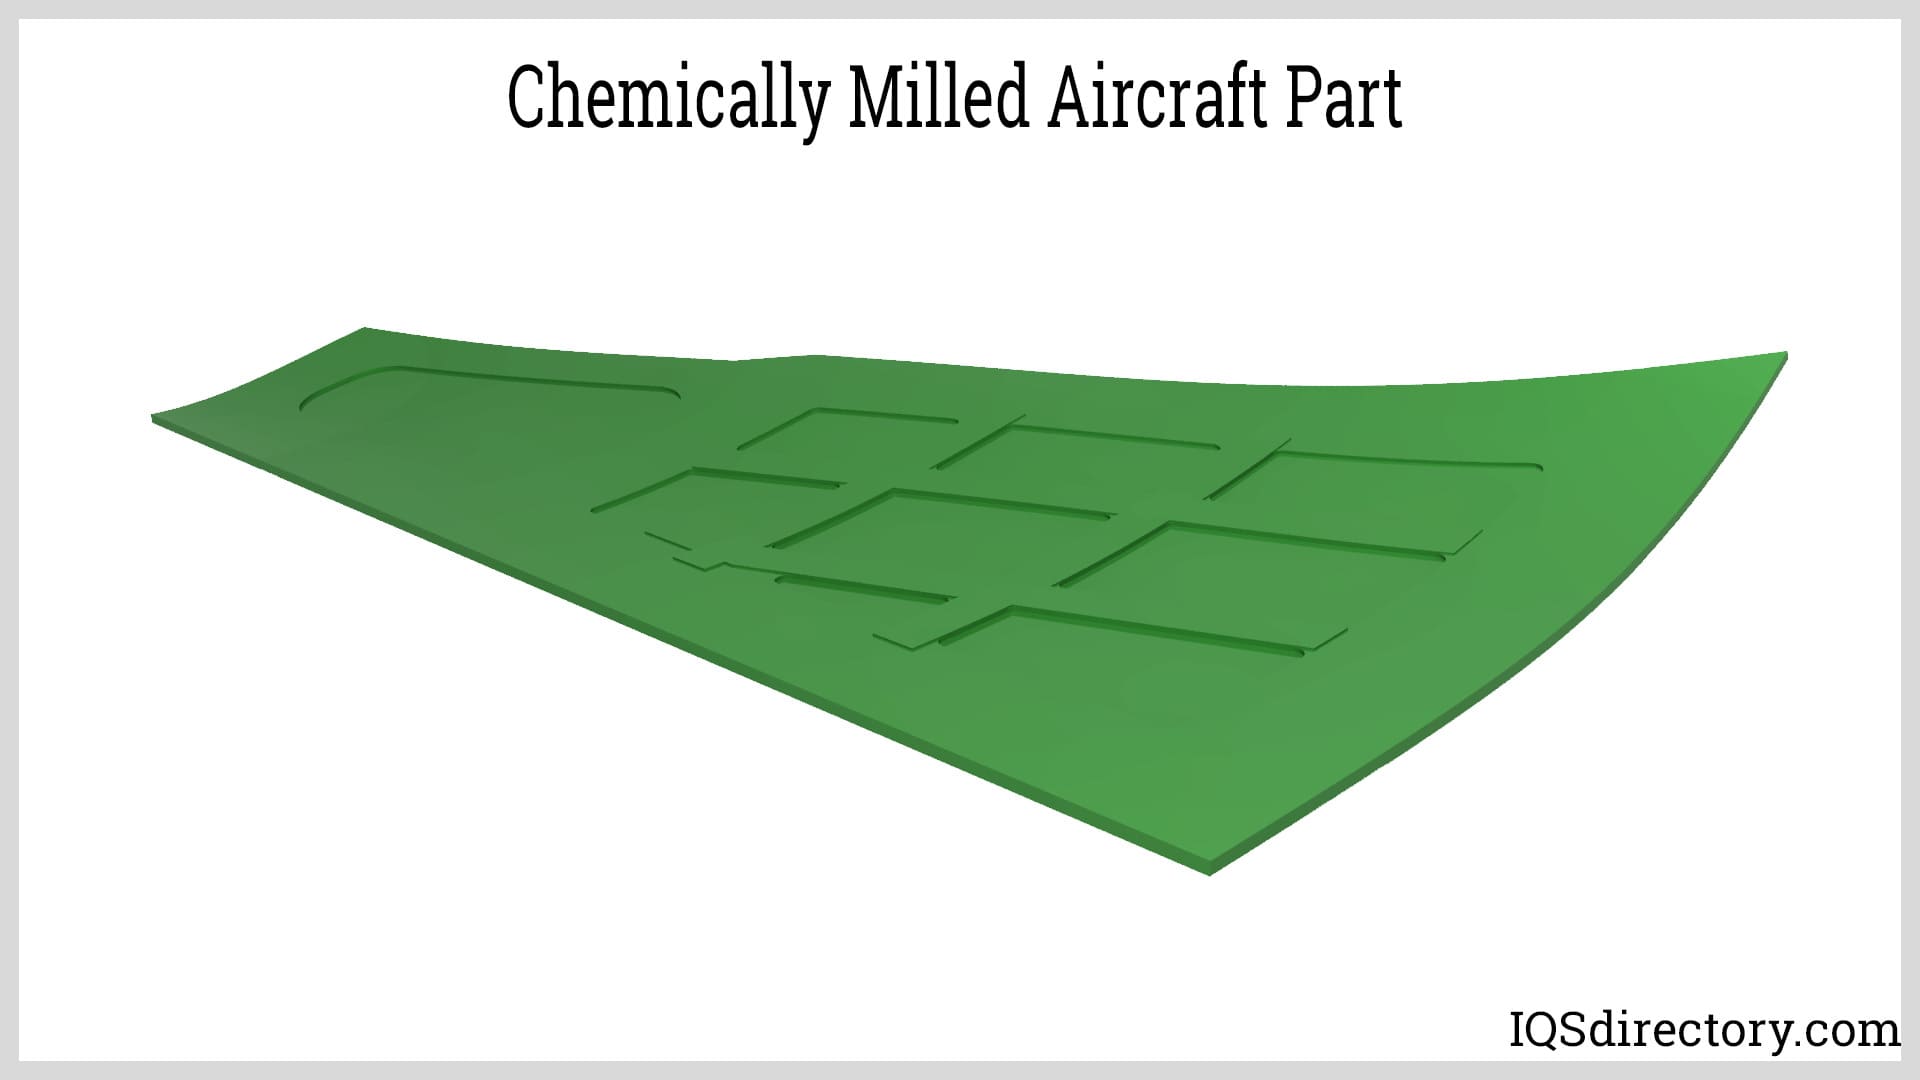 Chemically Milled Aircraft Part